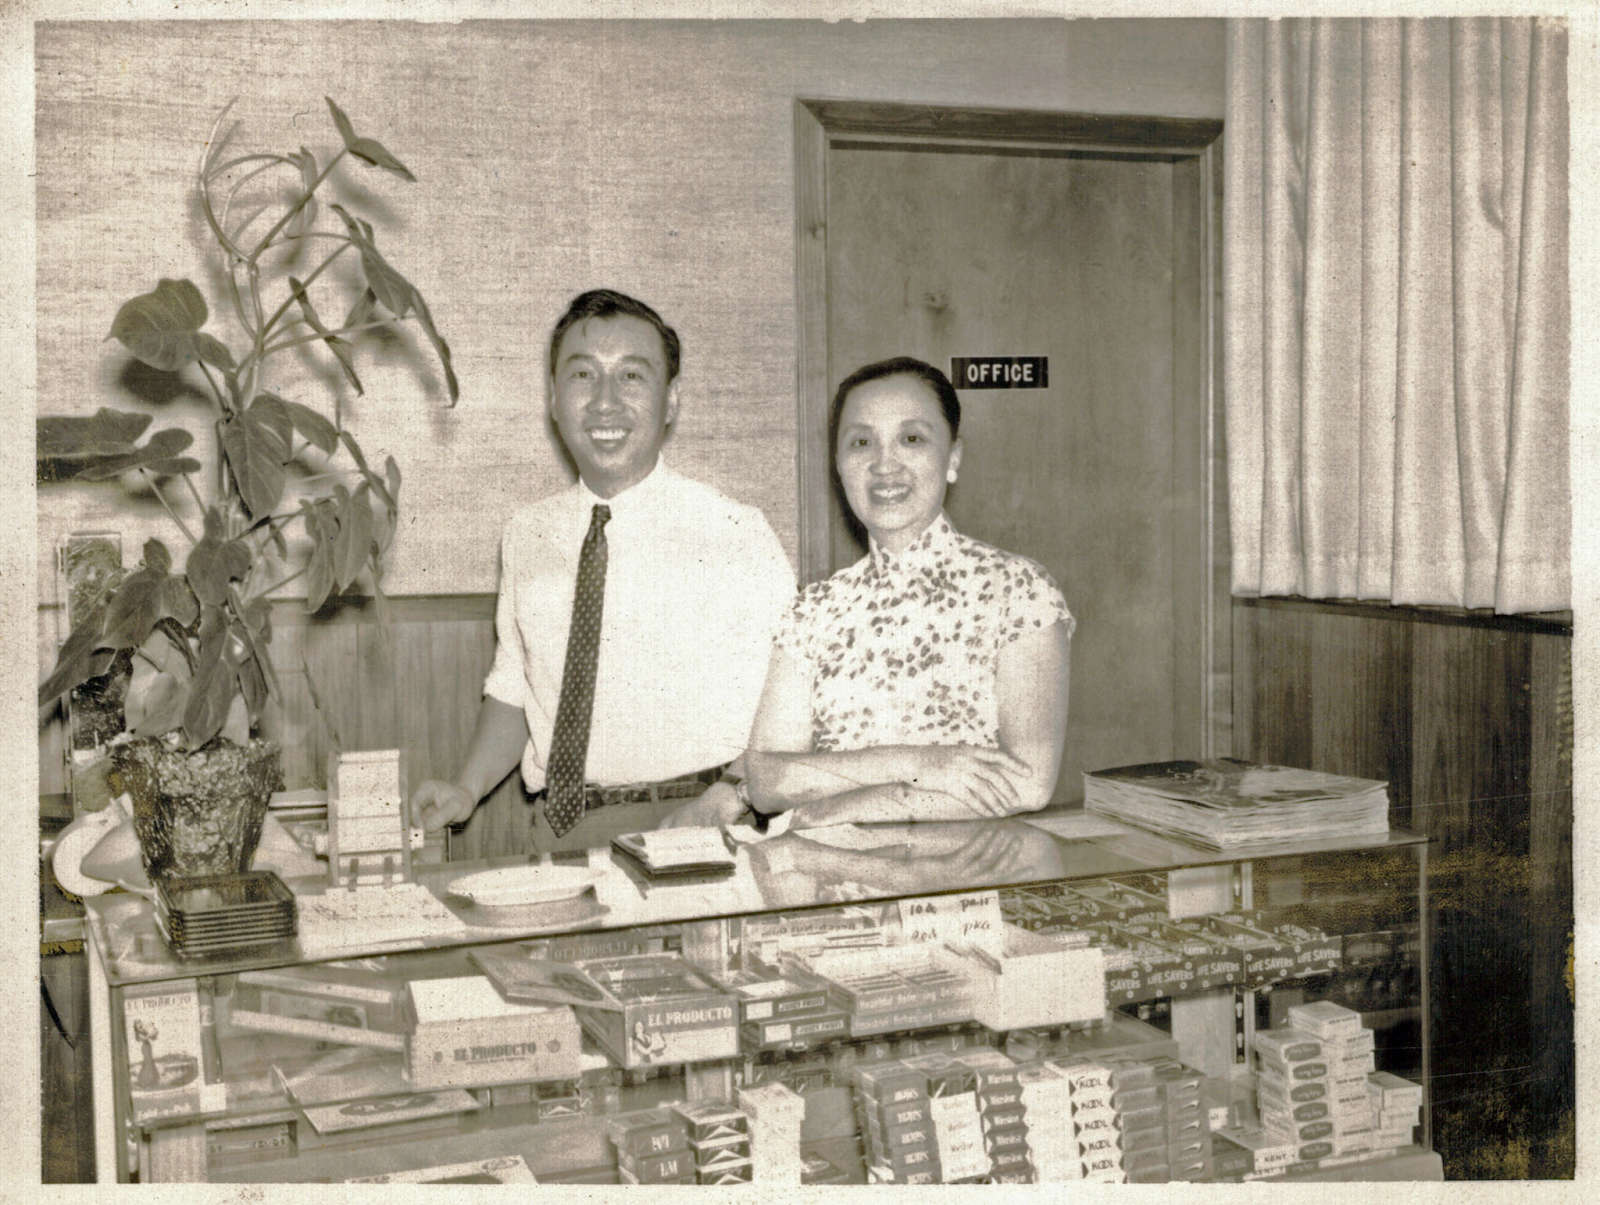 Two smiling people standing behind a glass case. Man on left wears a white white with a dark tie. Woman on right has dark hair and wears a short-sleeved floral dress. In background is a door that reads "office"